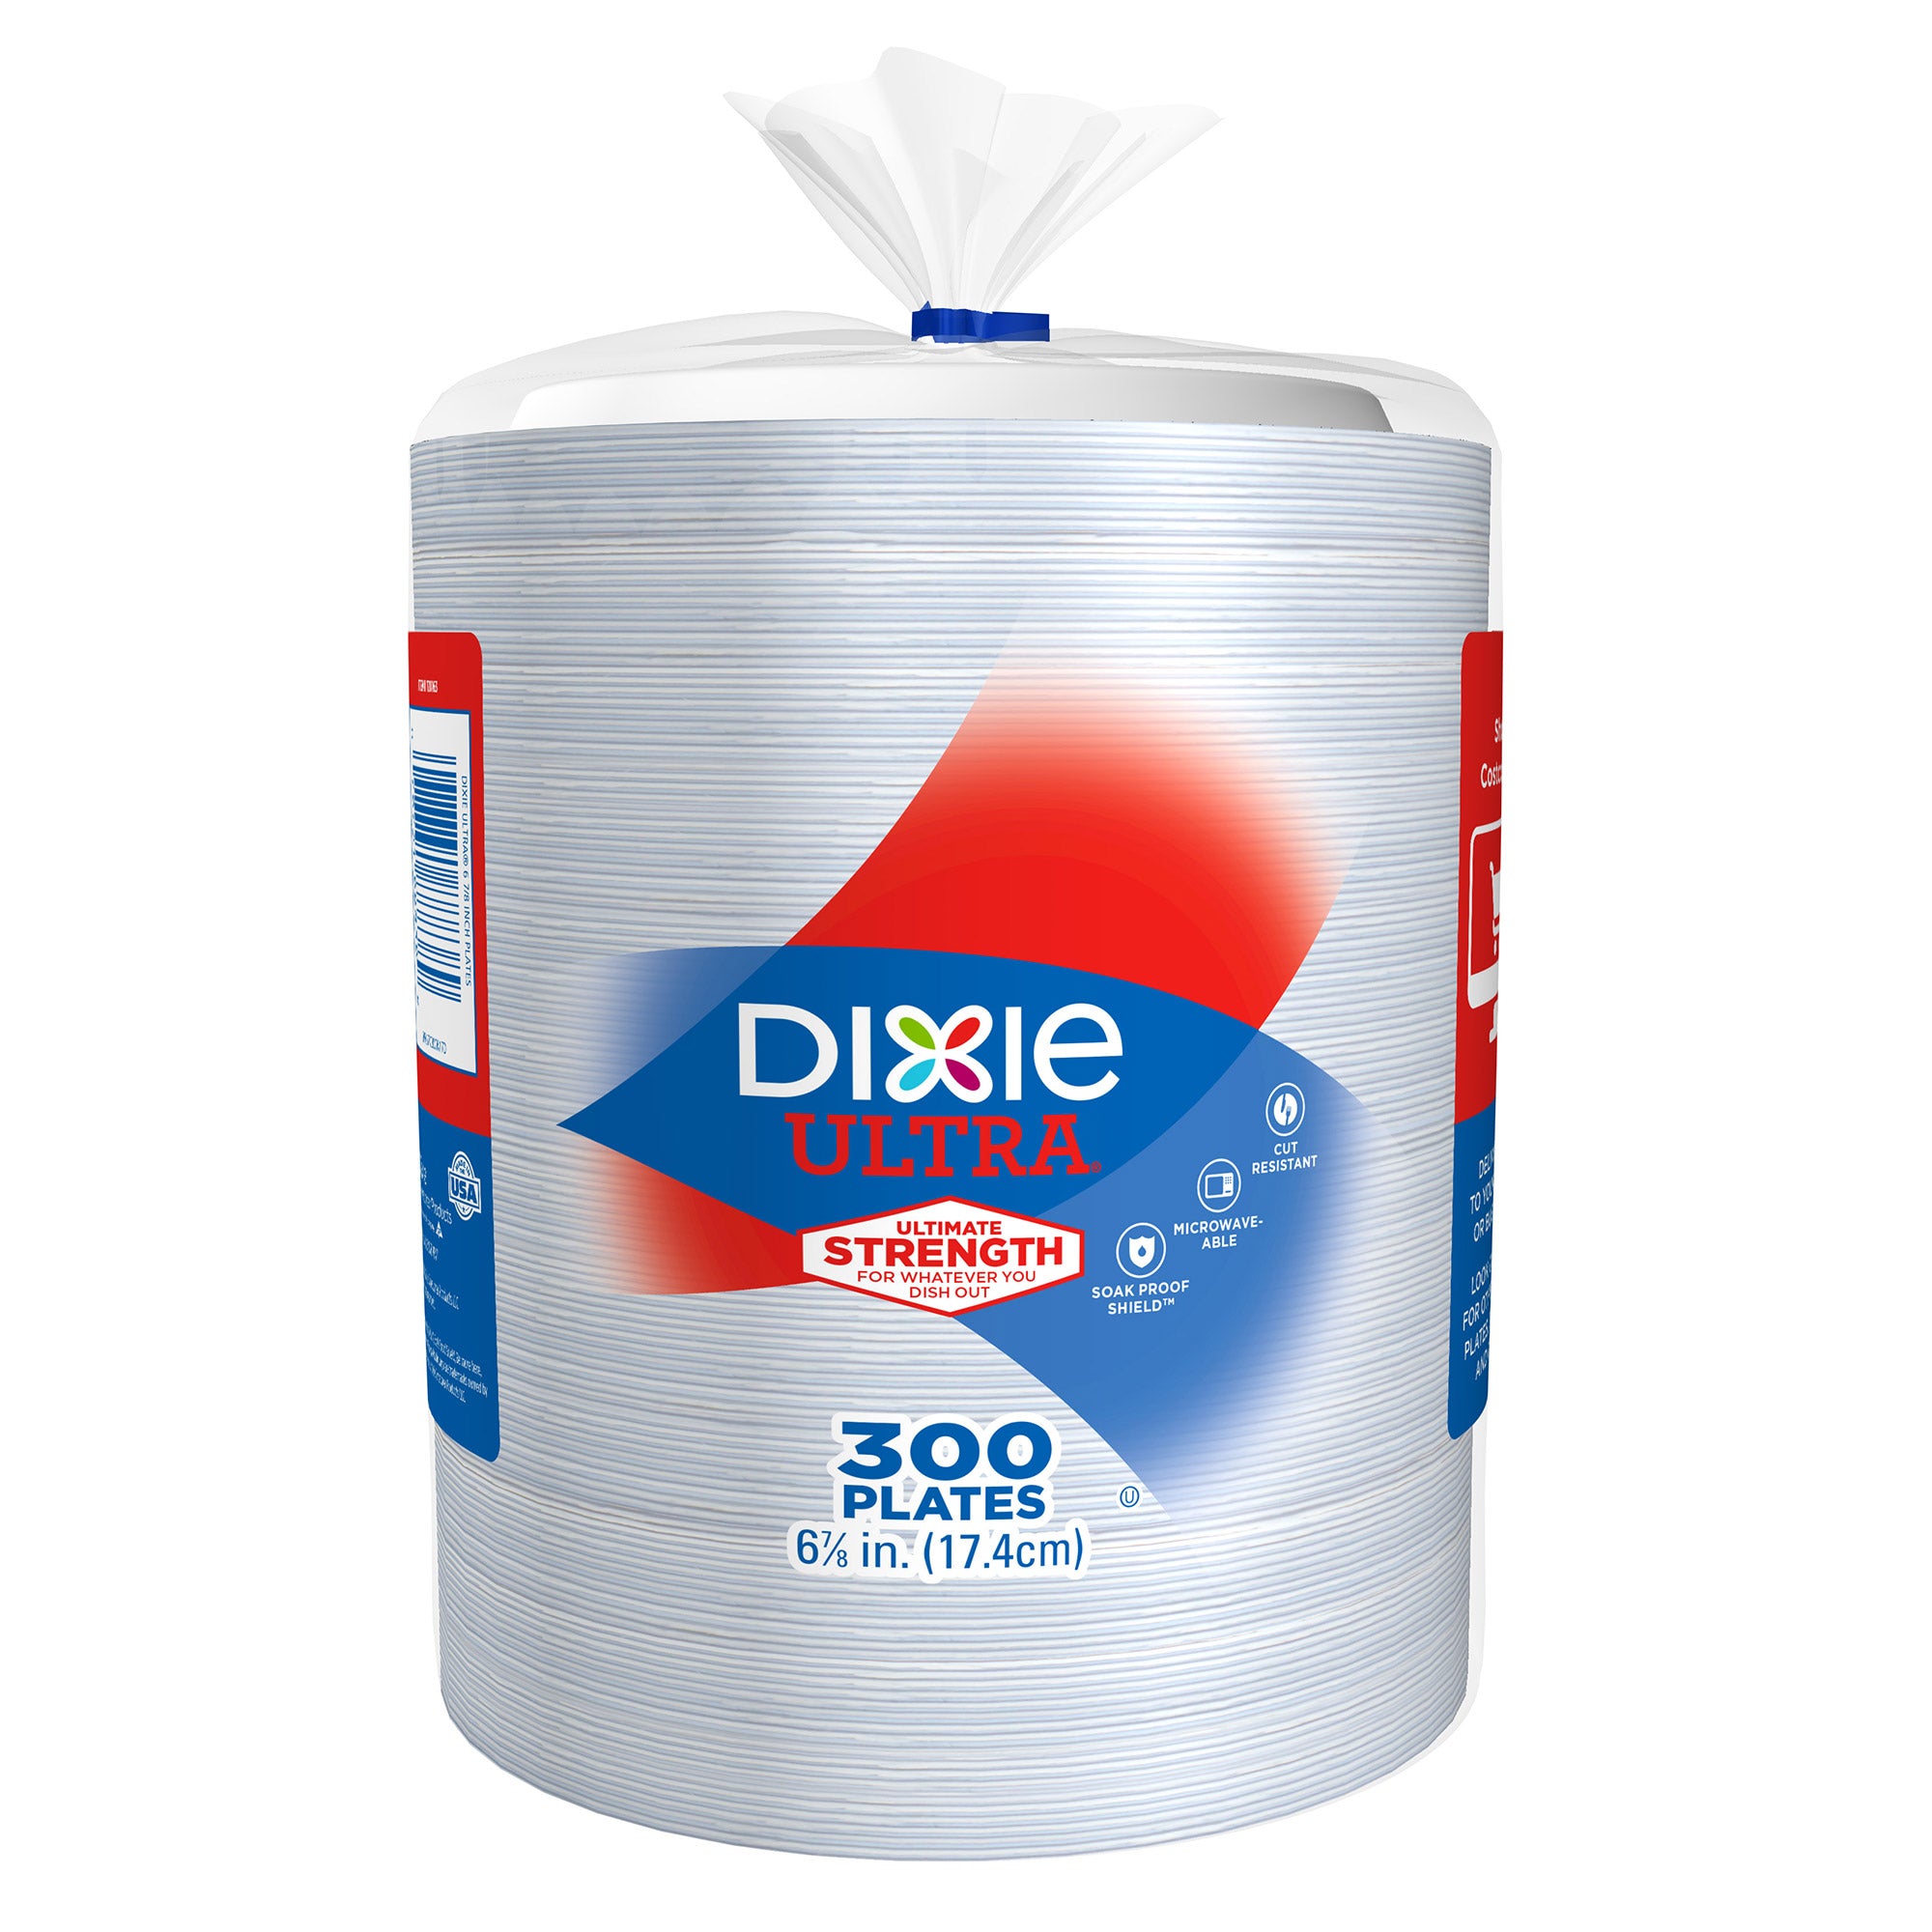 Dixie Ultra 6 7/8" Paper Plates, 300-count